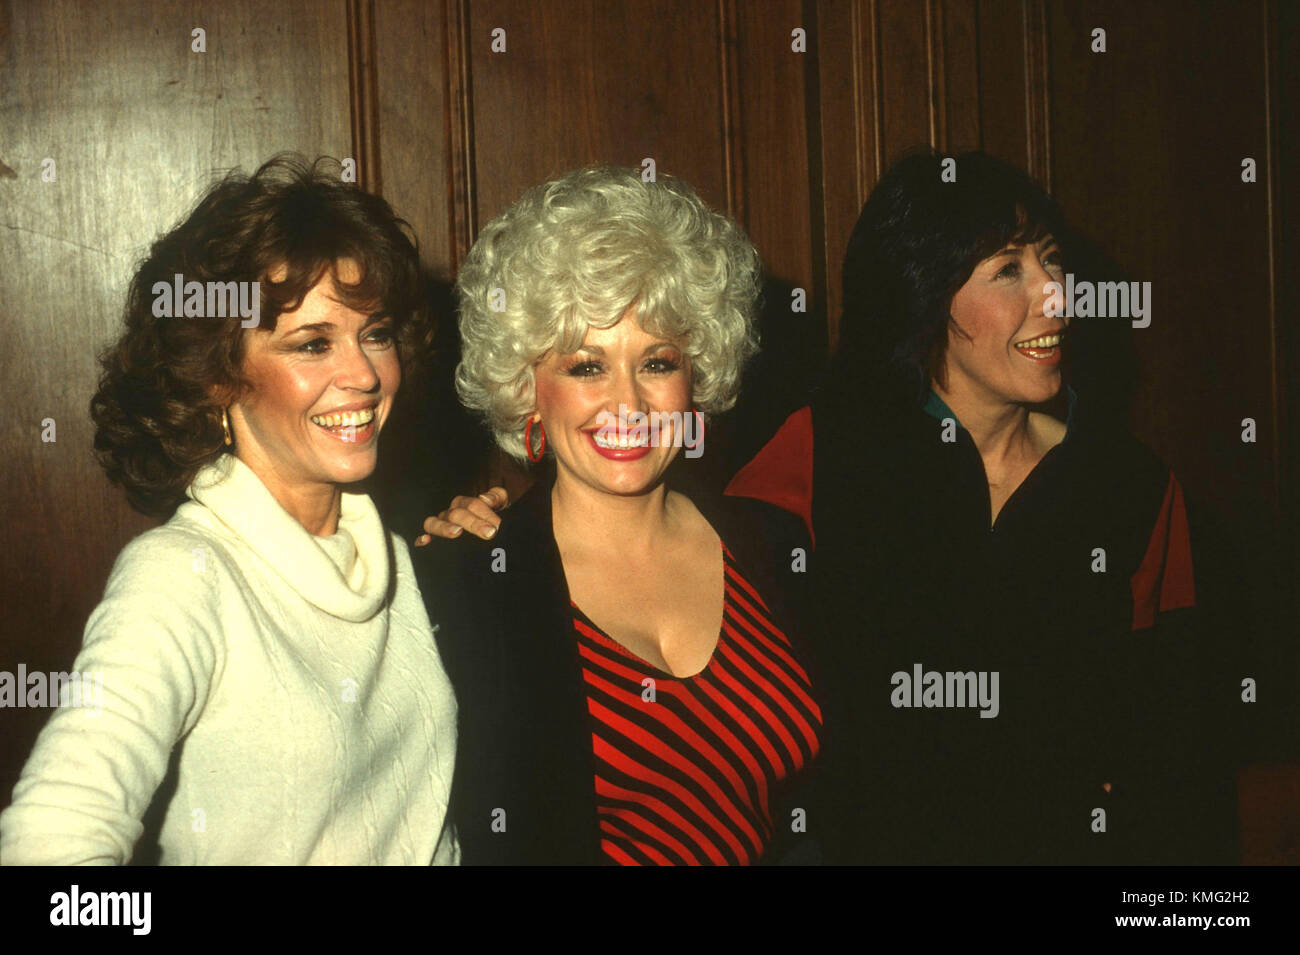 LOS ANGELES, CA - DECEMBER 11: (L-R) Actress Jane Fonda, singer Dolly Parton and comedian/actress Lily Tomlin attend the 9 to 5 press conference at the Century Plaza Hotel in Los Angeles, California on December 11, 1980. Photo by Barry King/Alamy Stock Photo